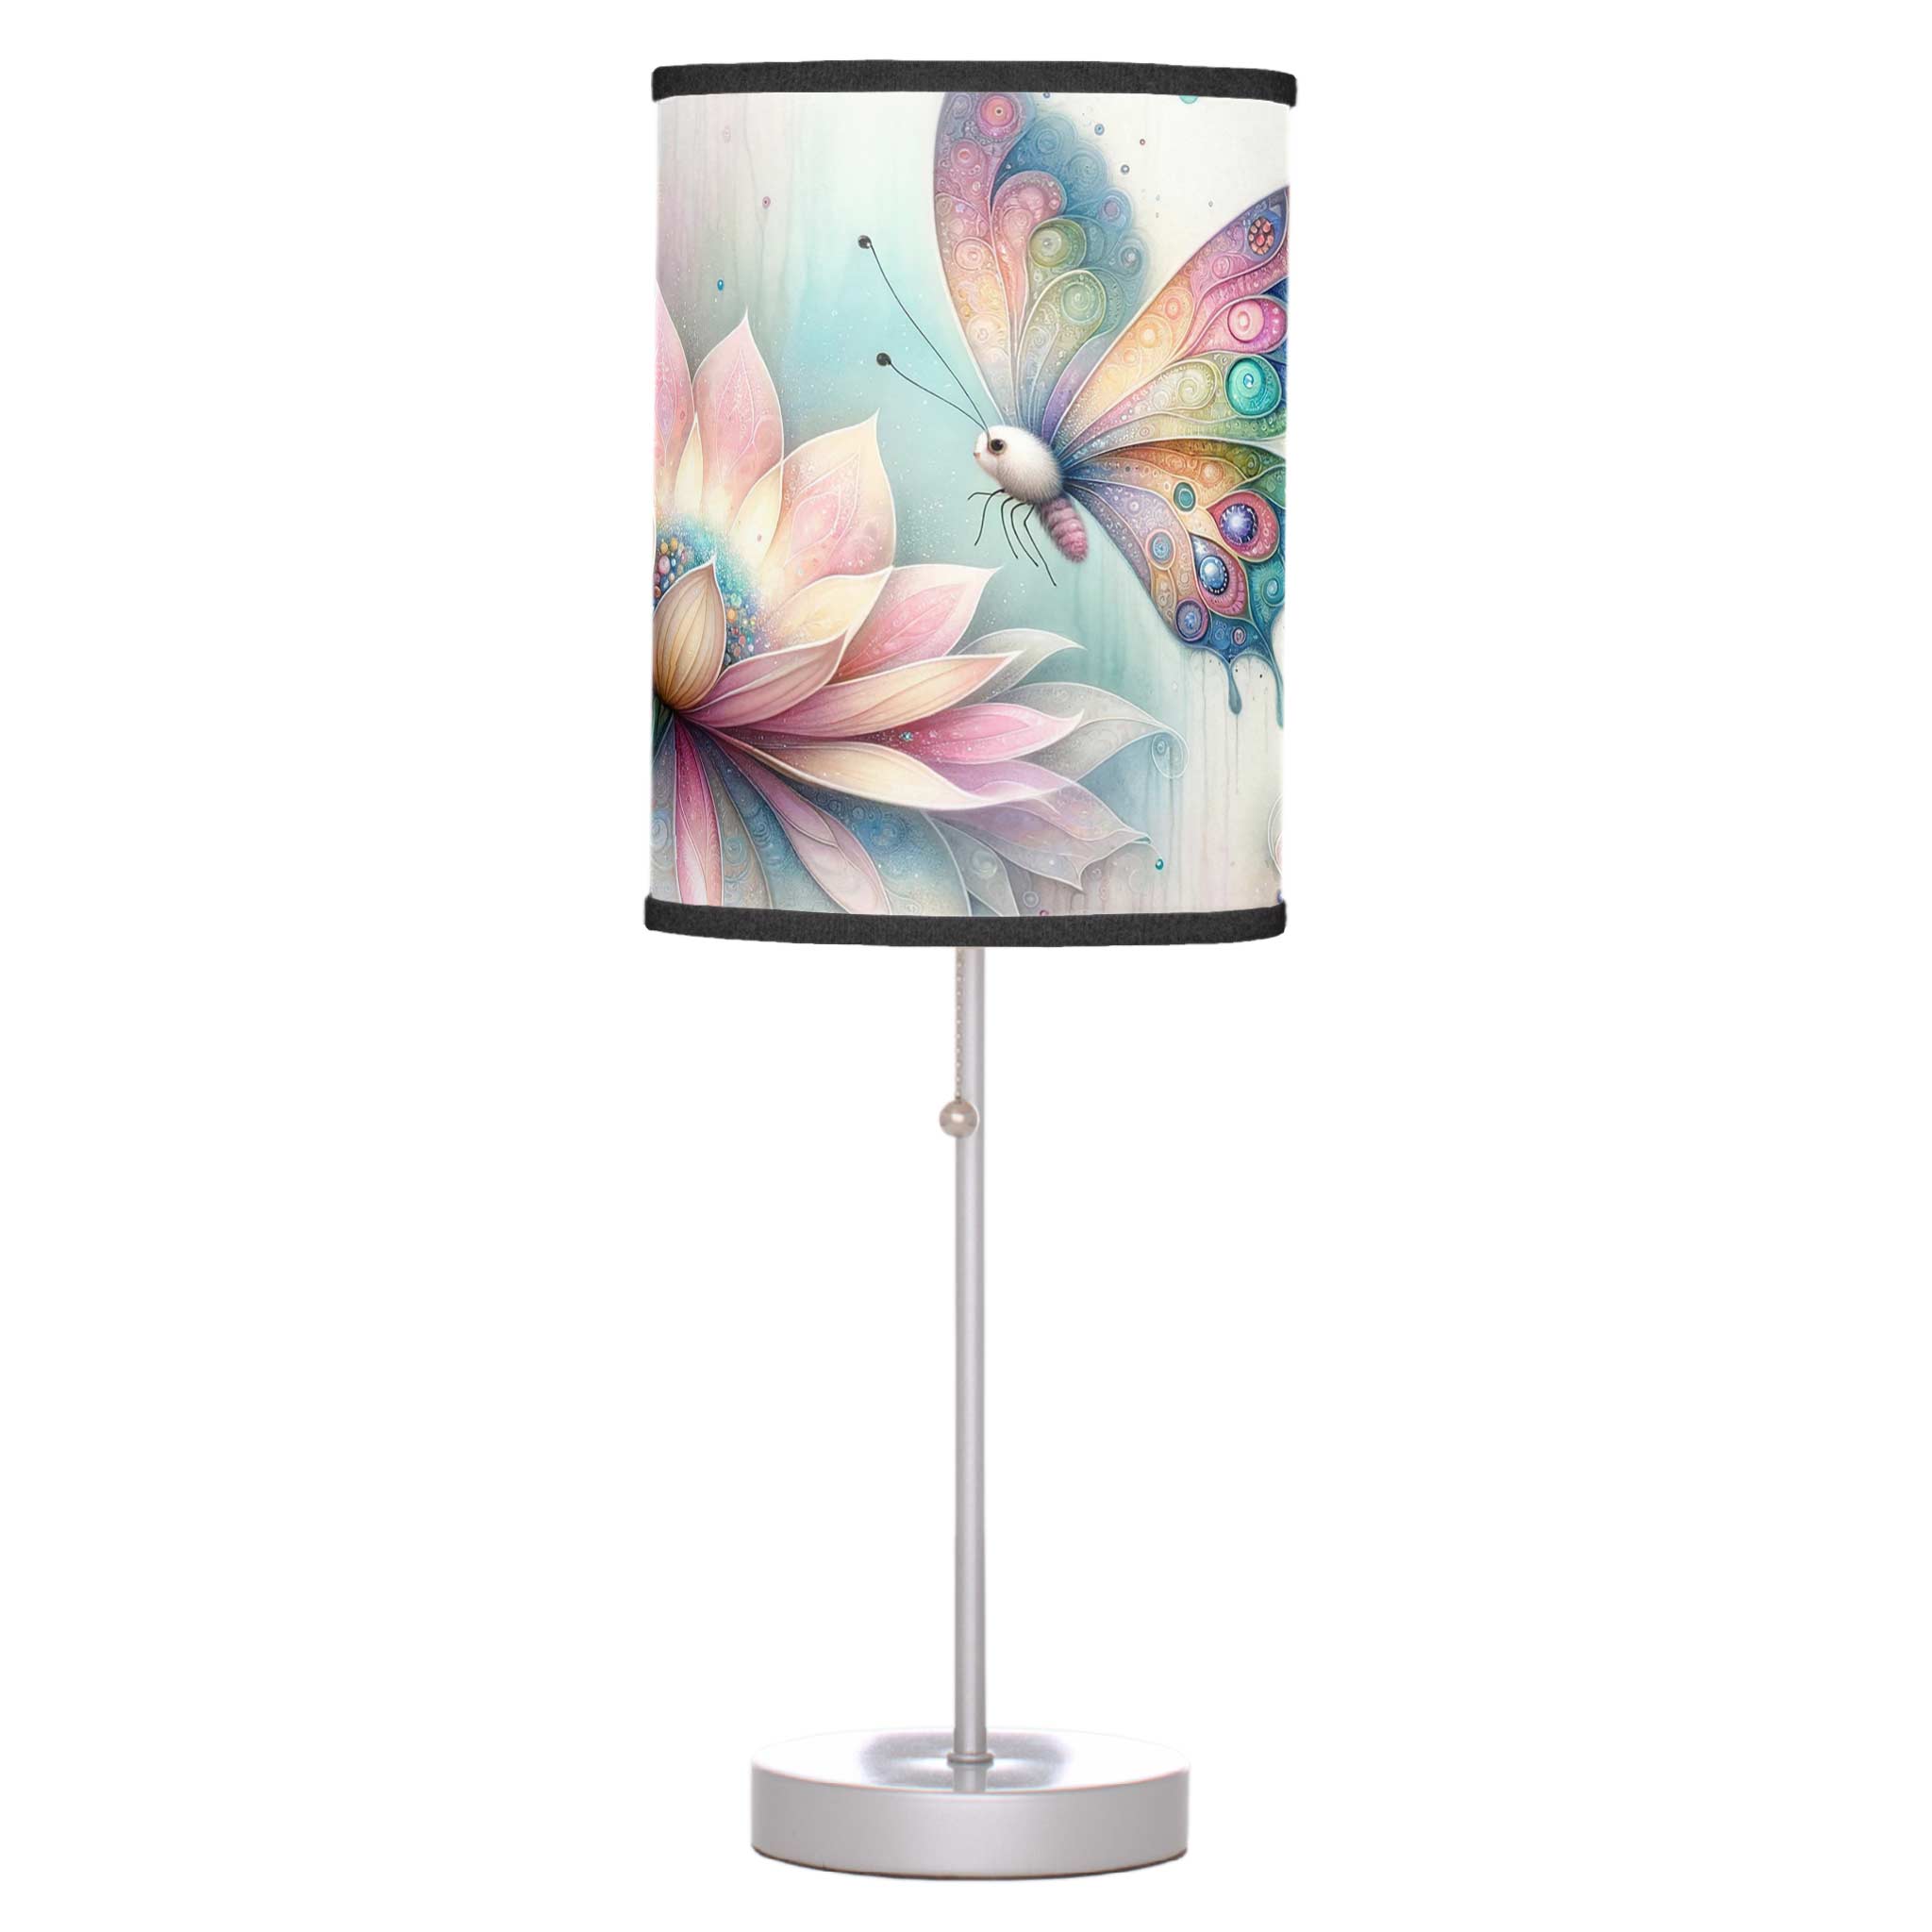 Whimsical butterfly lamp. Click to shop.